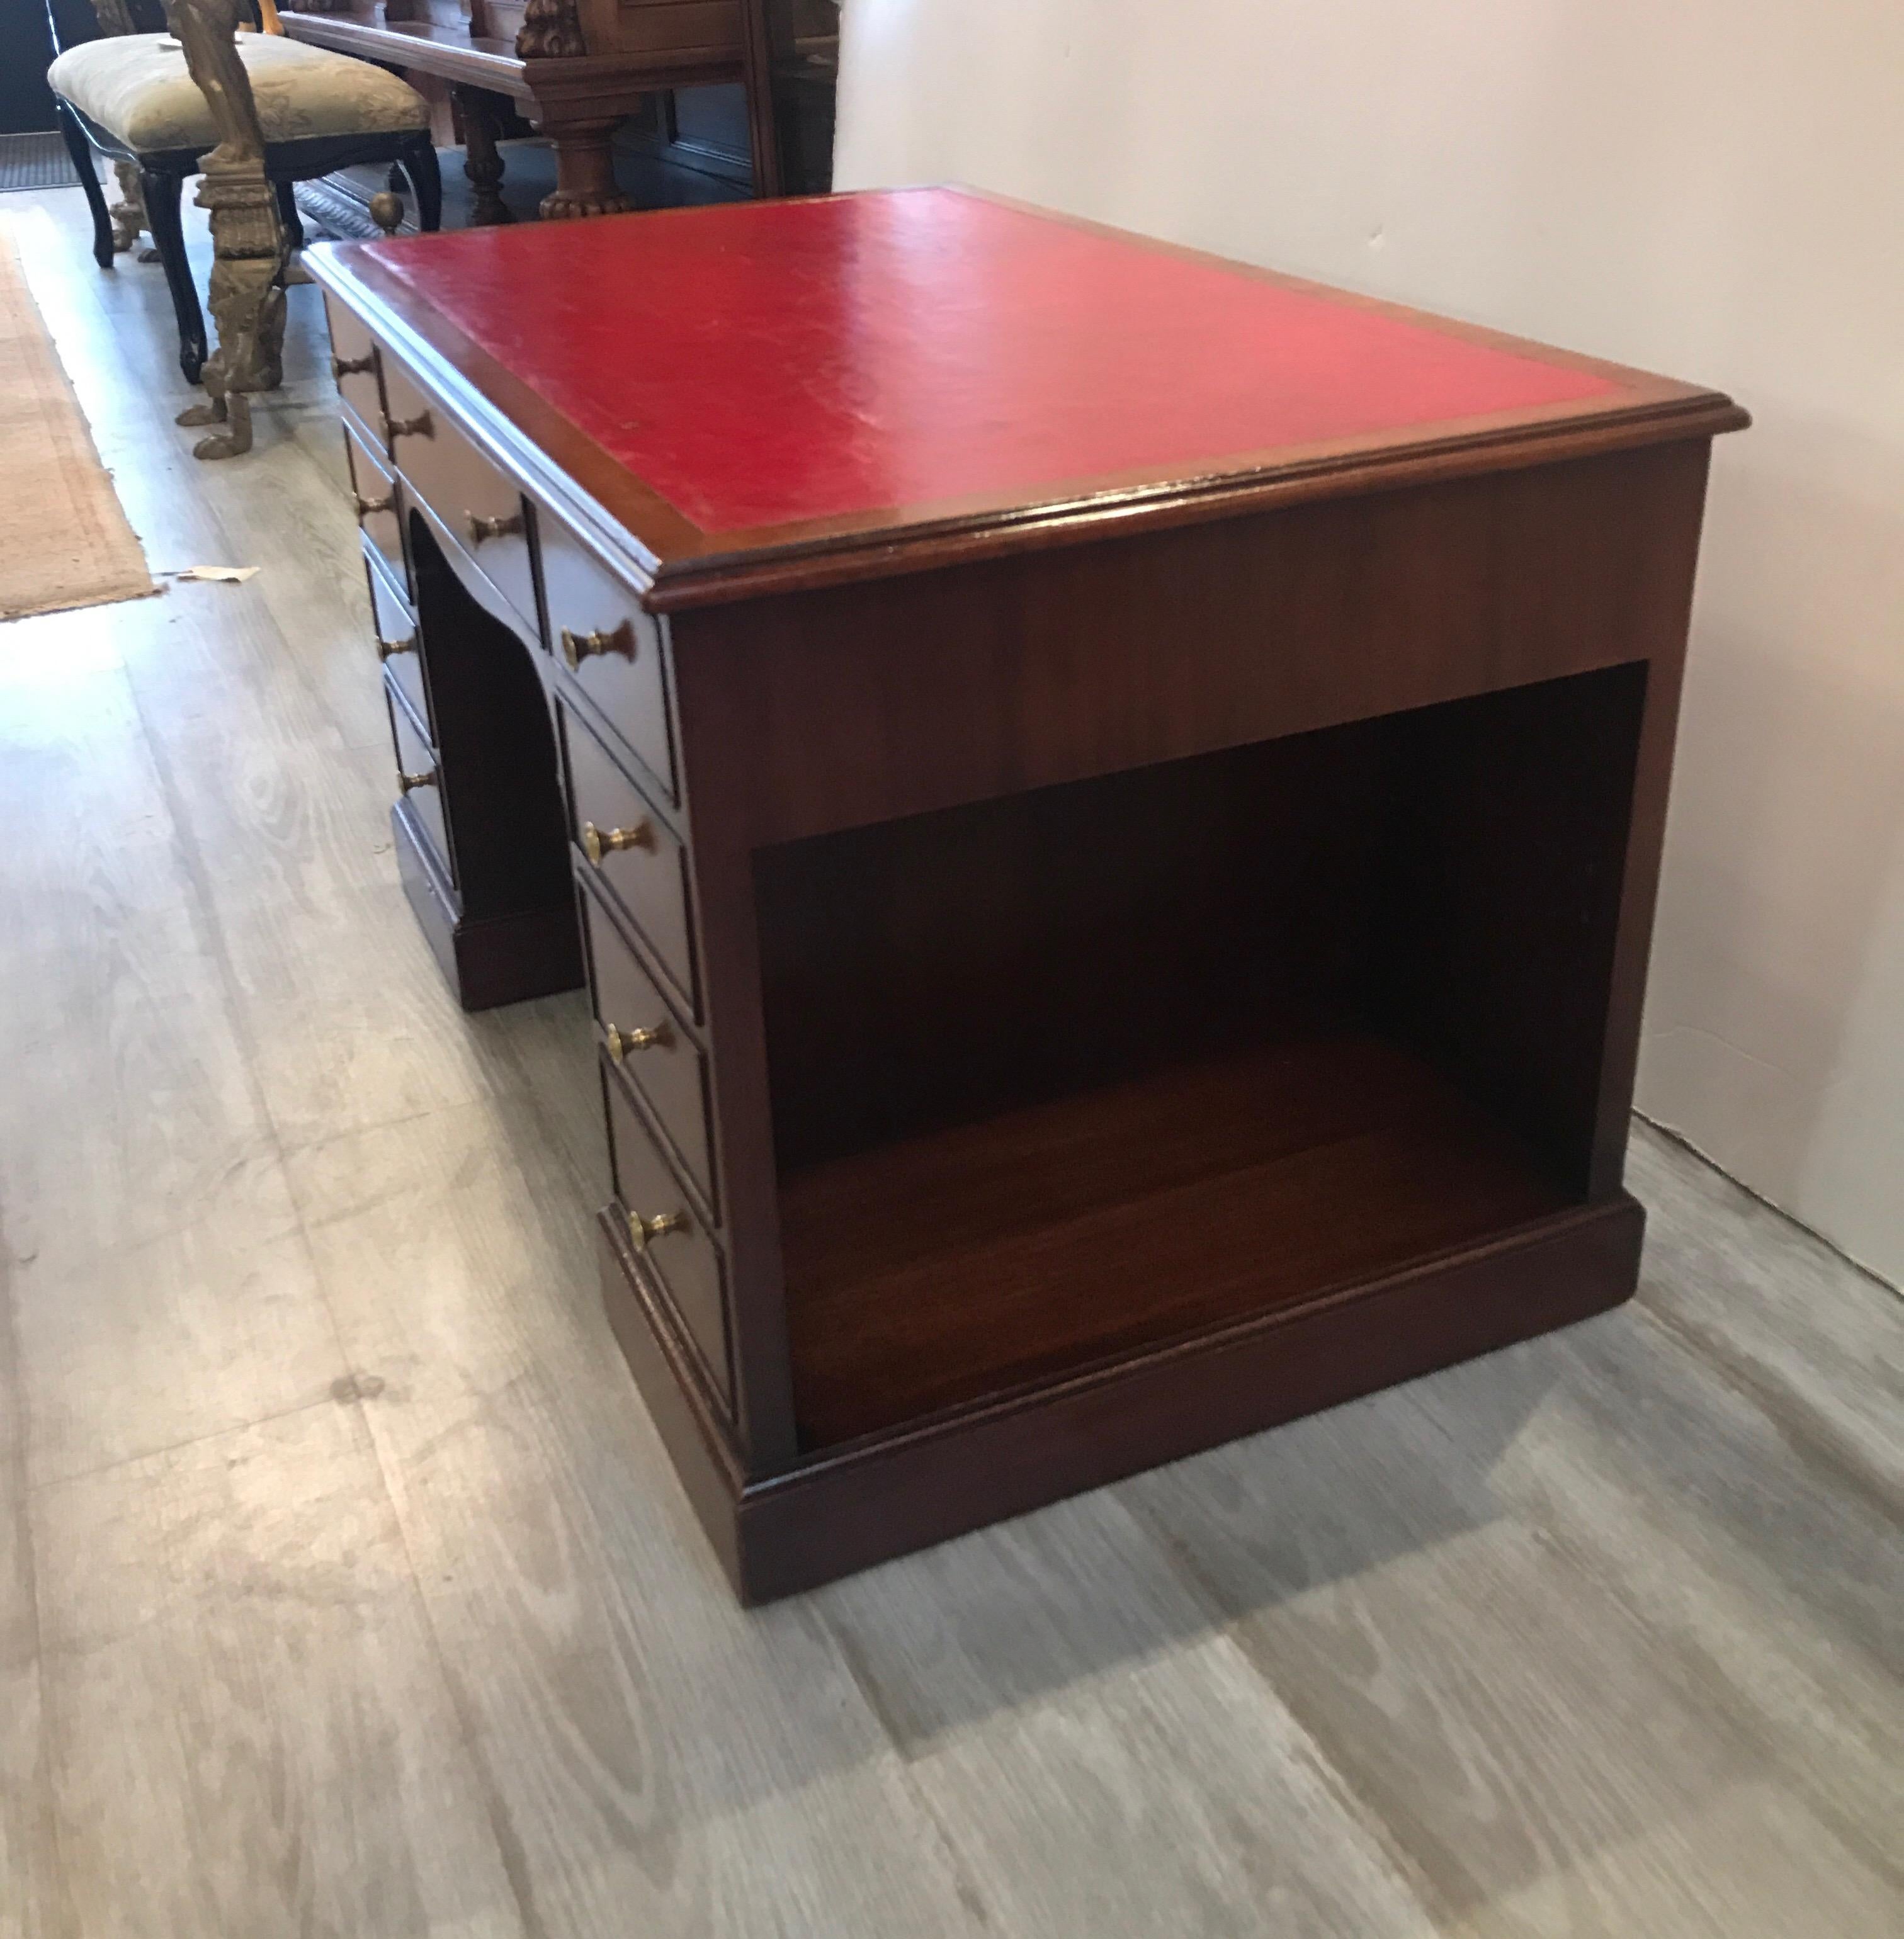 Whimsical mahogany and leather cocktail table in the form of an executive desk. Perfect for a study or library. The red leather top with three upper working drawers below. The side drawers are not function but there are two open storage compartments